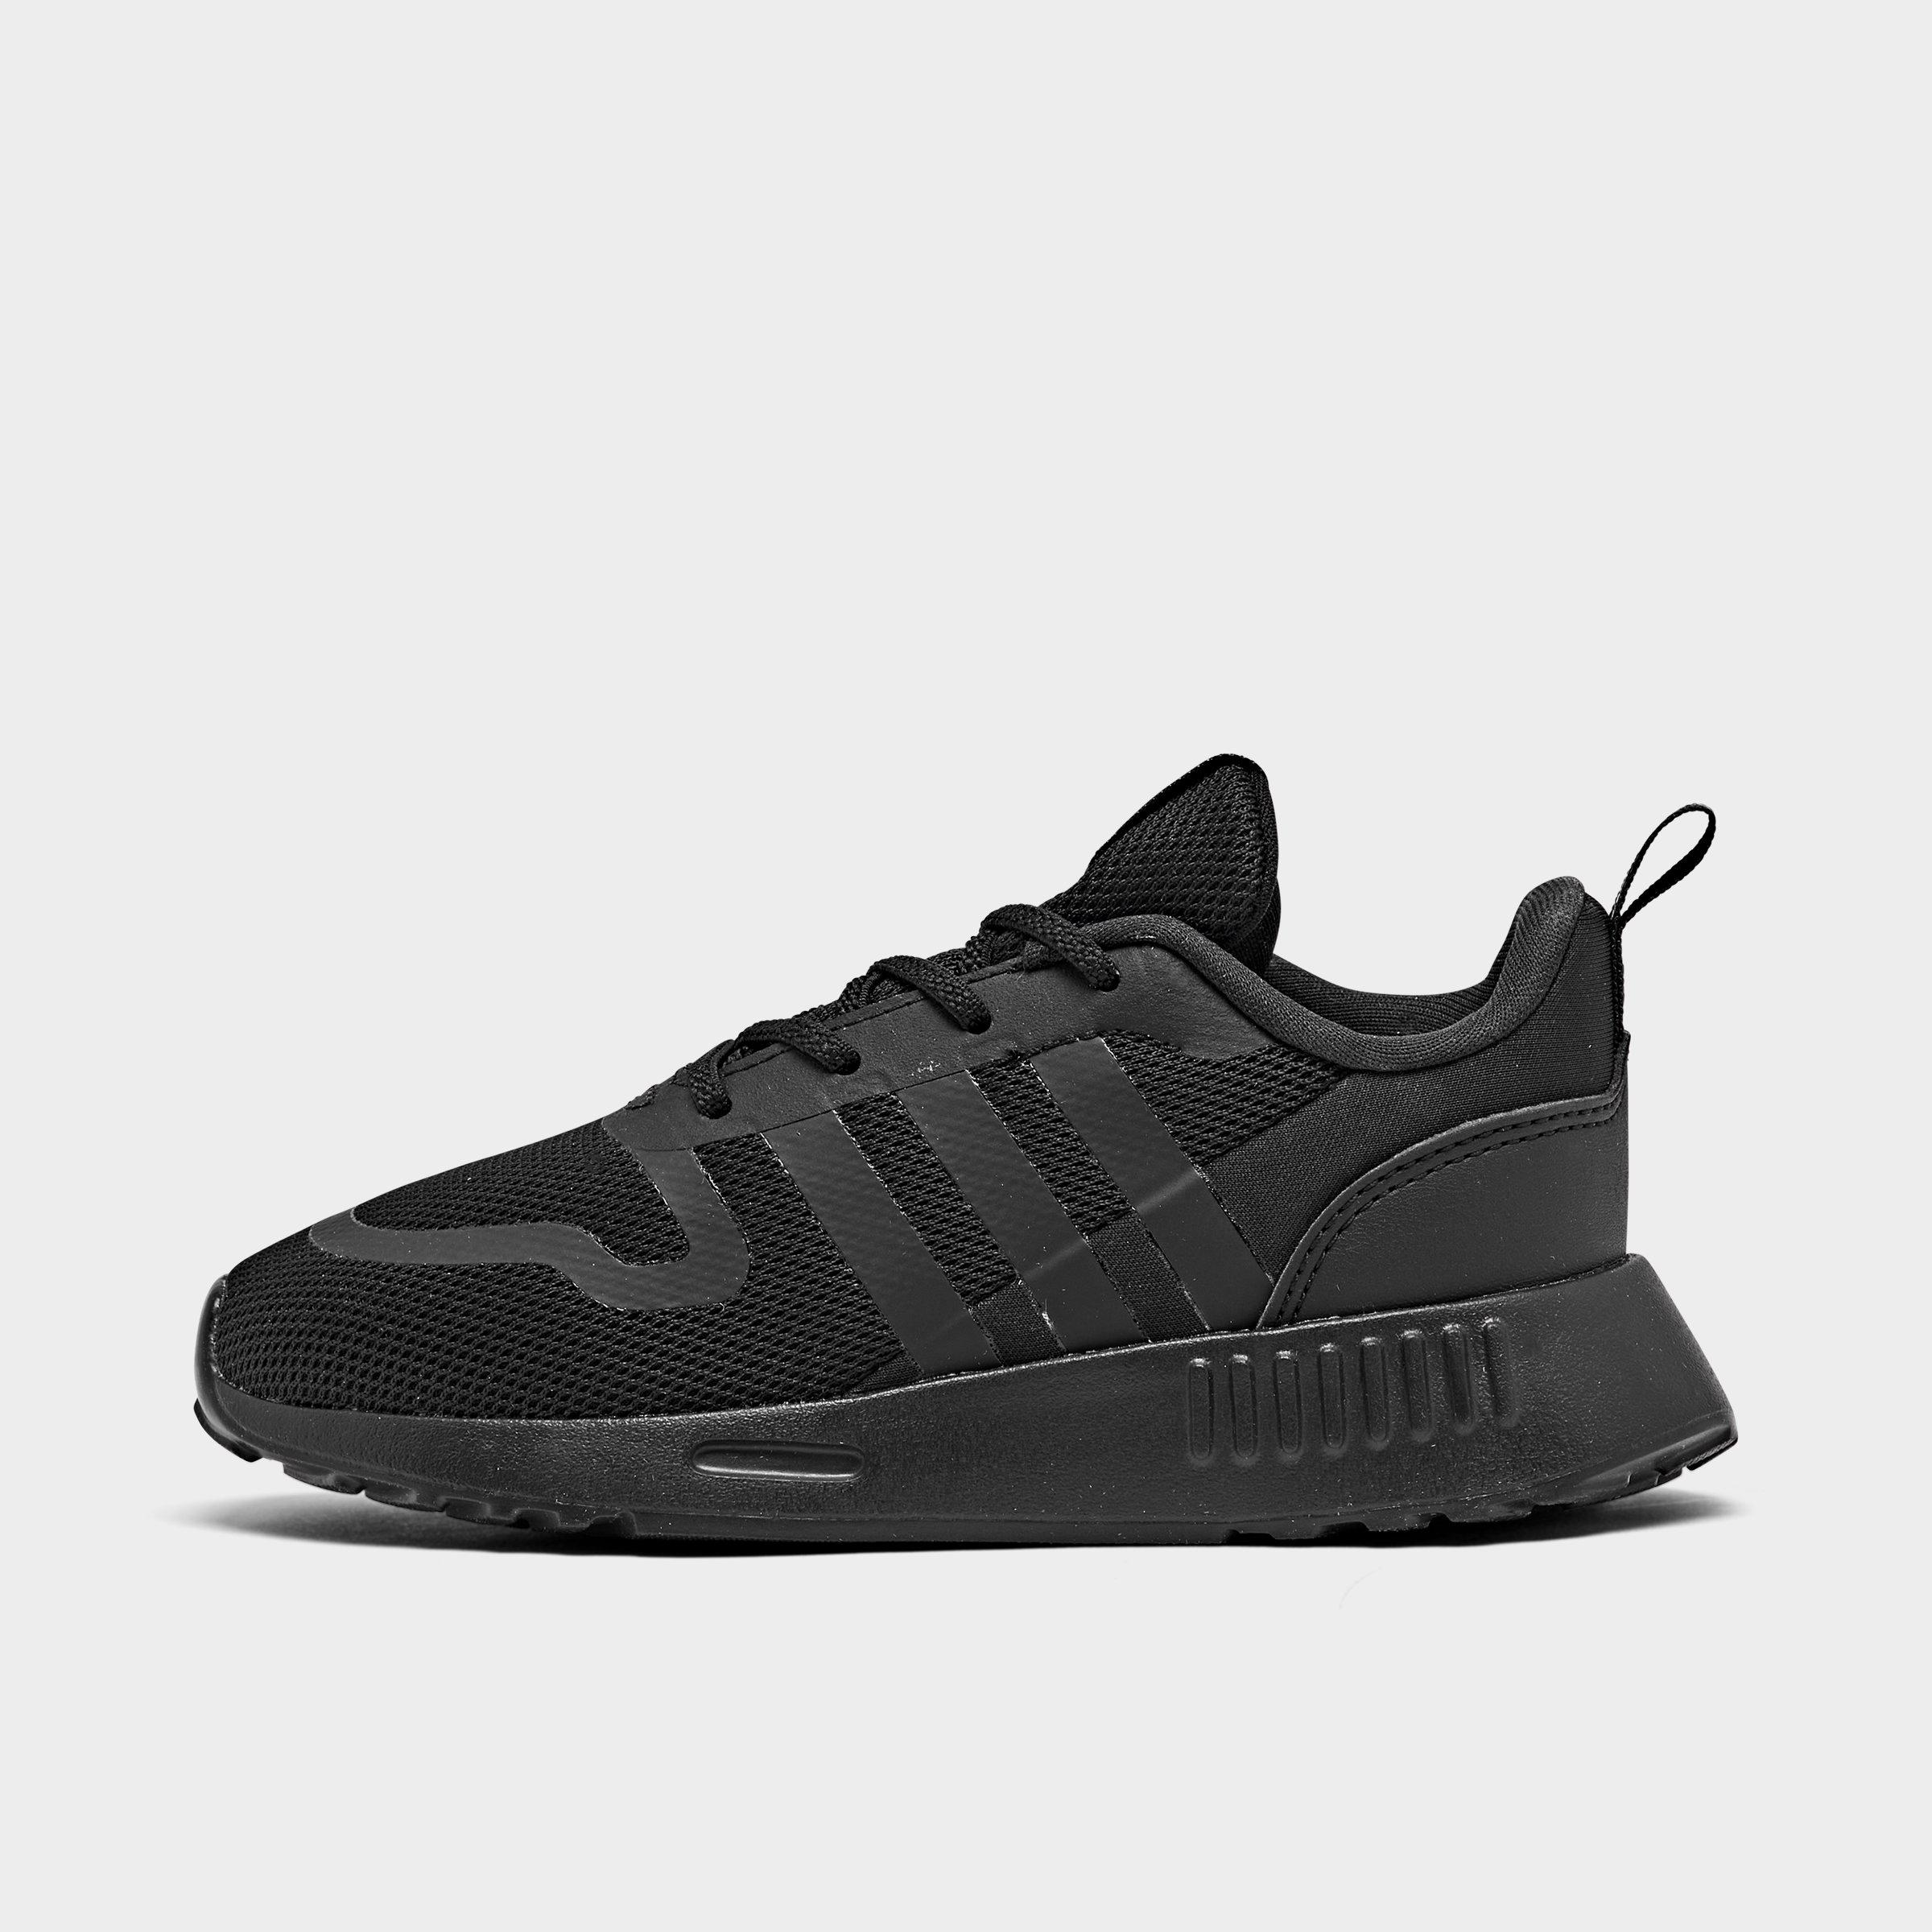 cool adidas shoes for boys